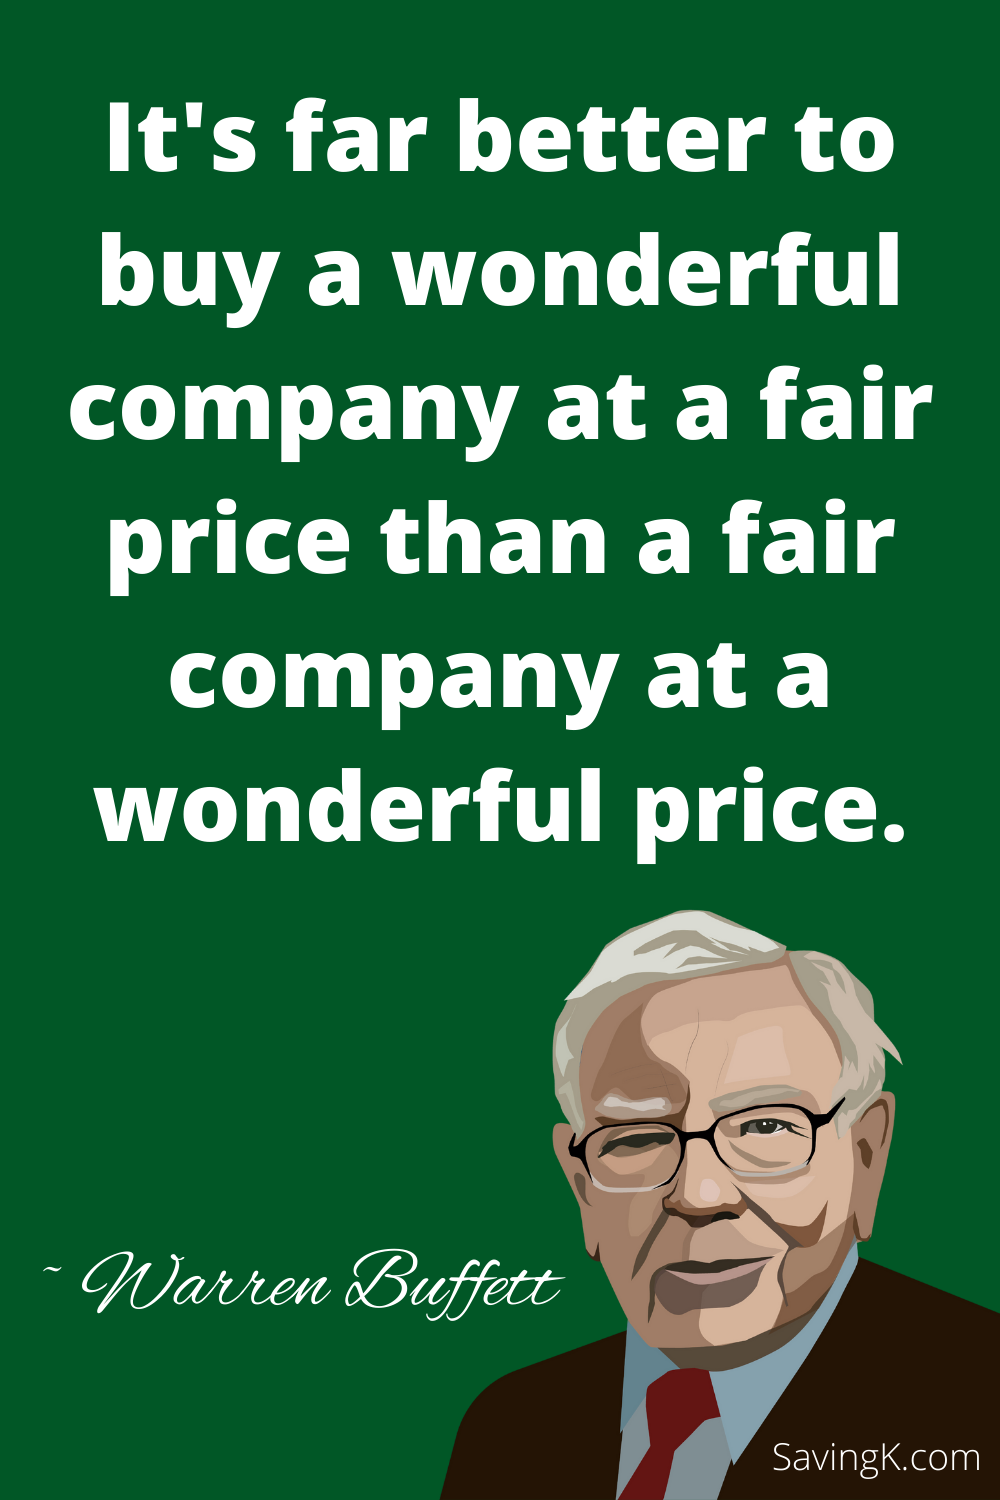 It's far better to buy a wonderful company at a fair price than a fair company at a wonderful price.